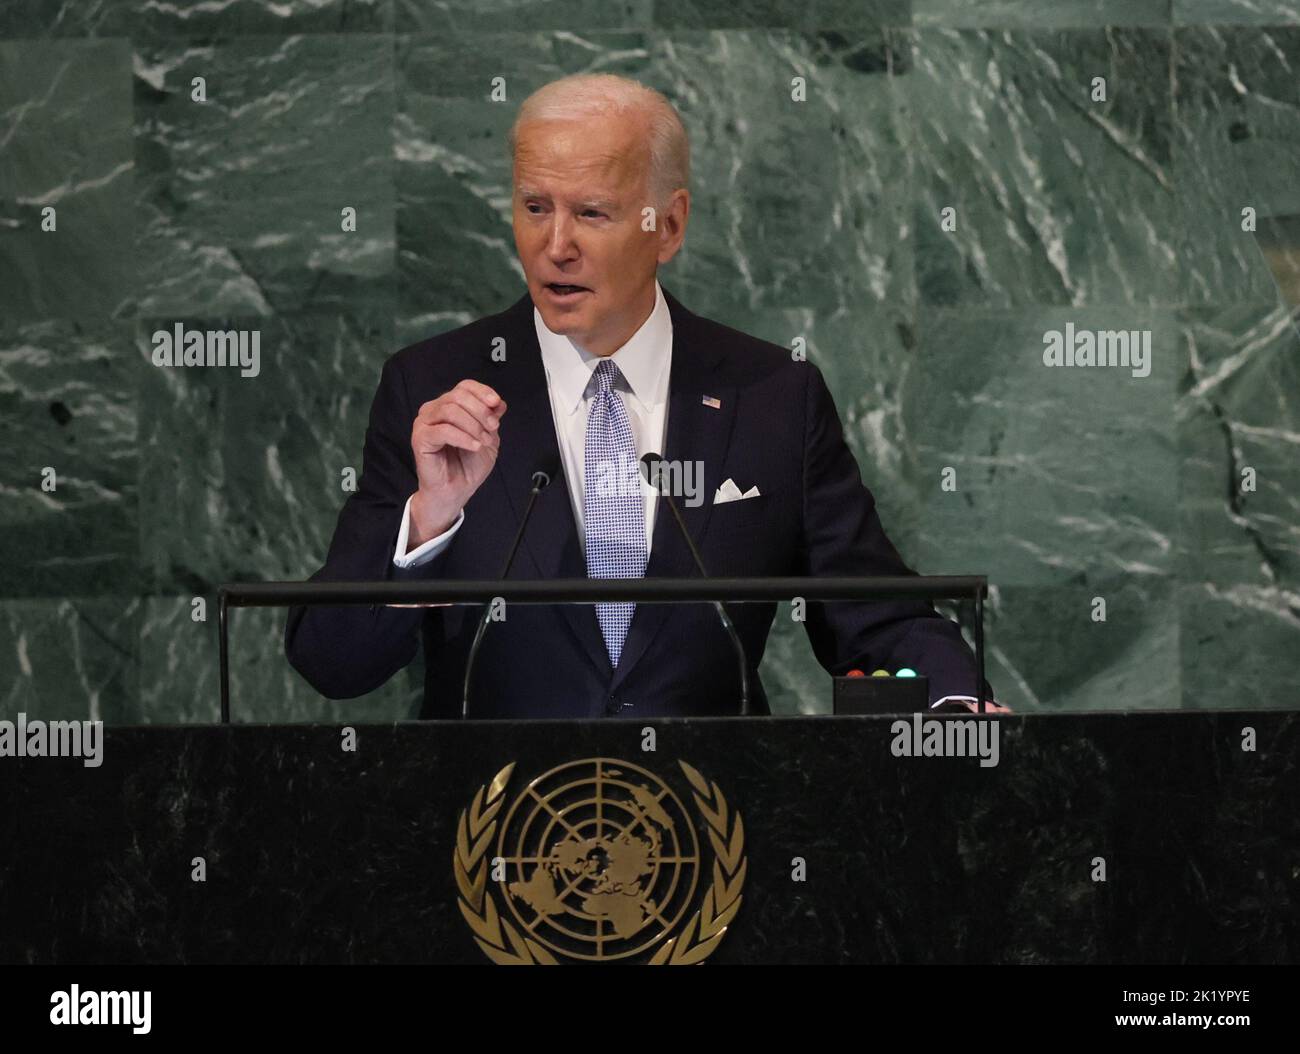 U.S. President Joe Biden addresses the 77th Session of the United Nations General Assembly at U.N. Headquarters in New York City, U.S., September 21, 2022. REUTERS/Brendan McDermid Stock Photo